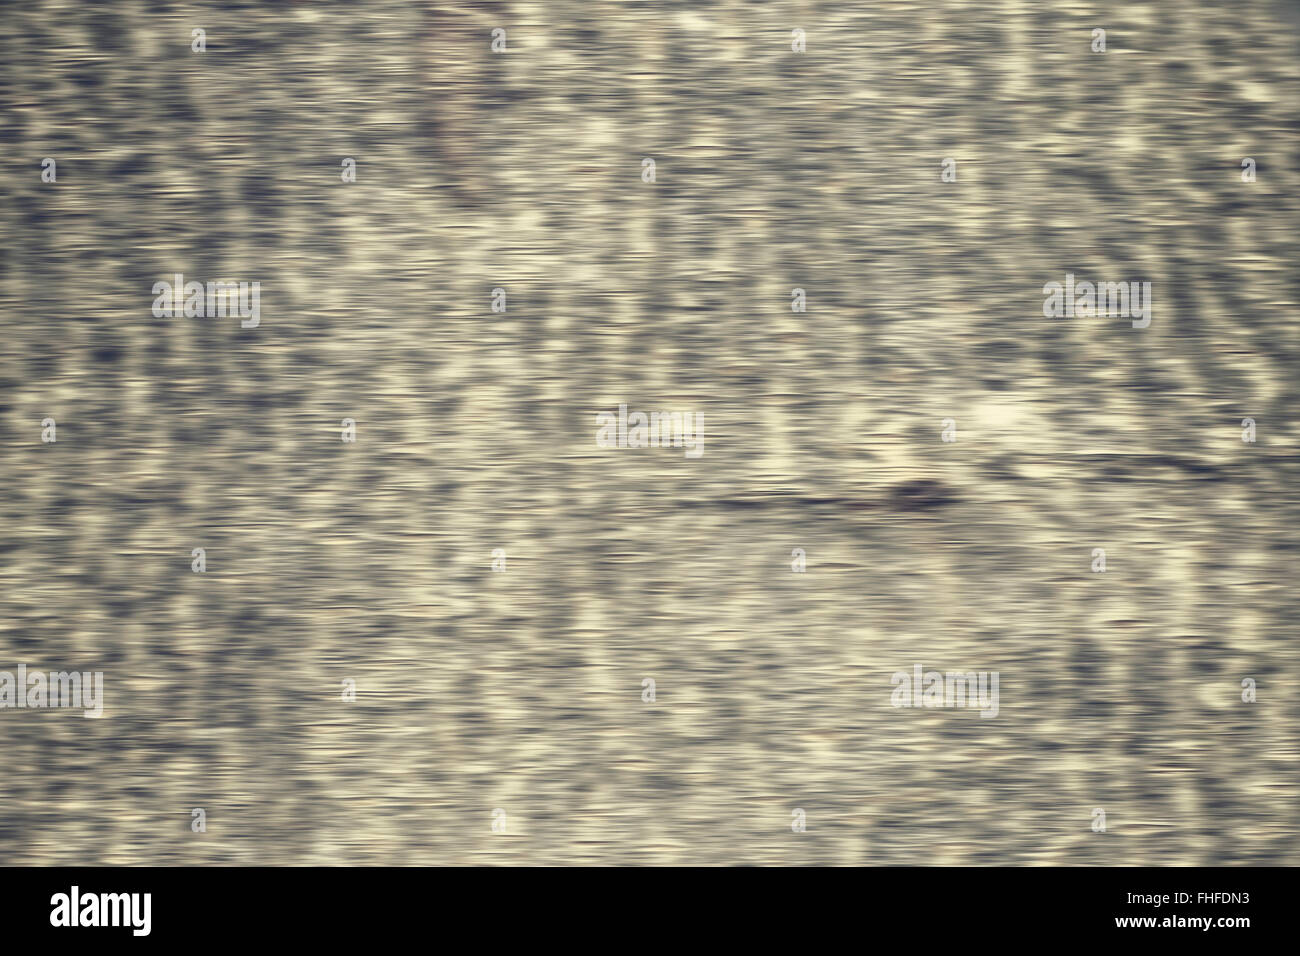 Abstract background made of blurred bark. Stock Photo